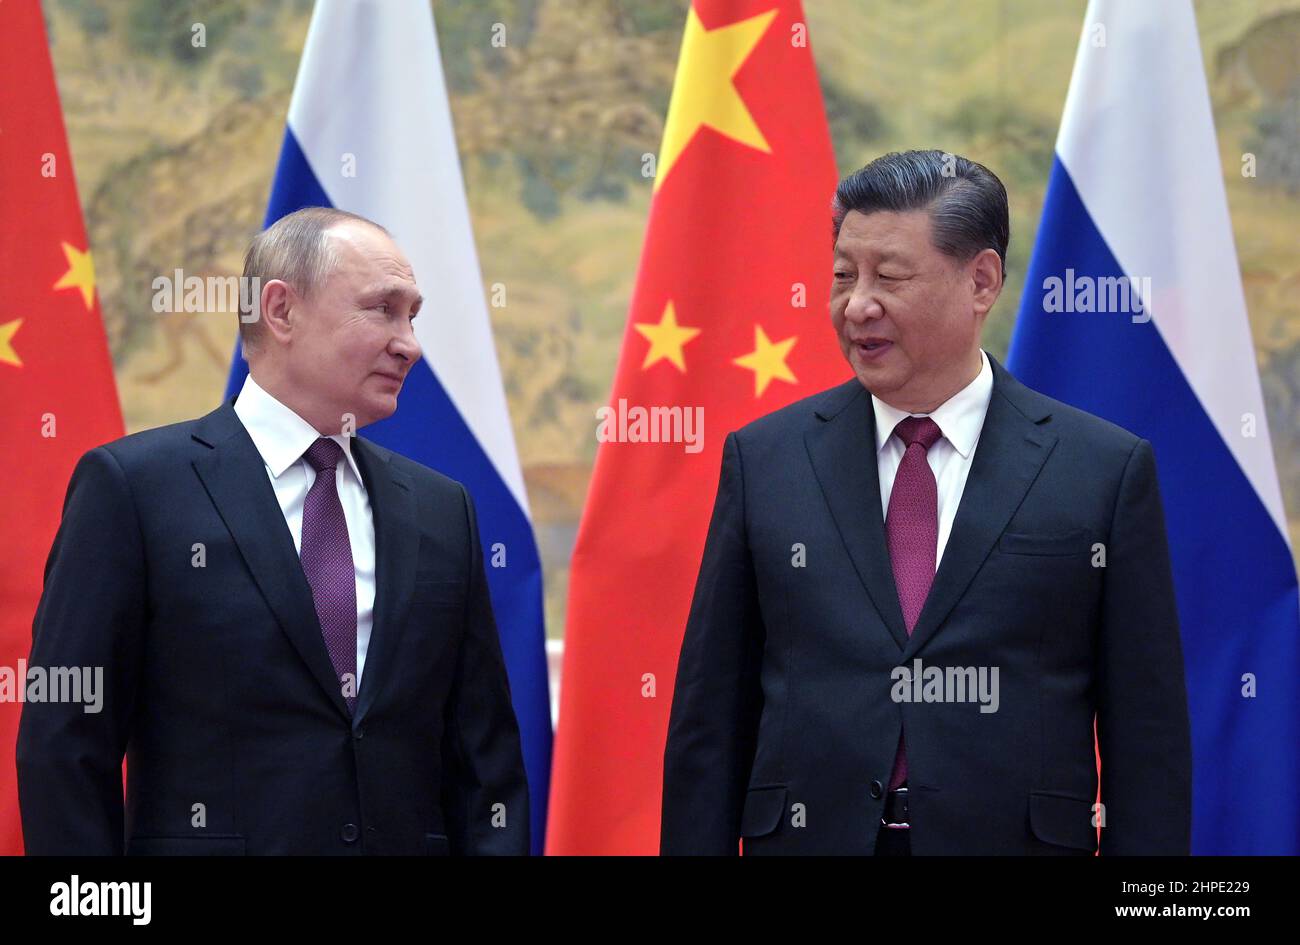 Russian President Vladimir Putin (left) meeting with President of China Xi Jinping at the opening of the Beijing 2022 Winter Olympics. Stock Photo